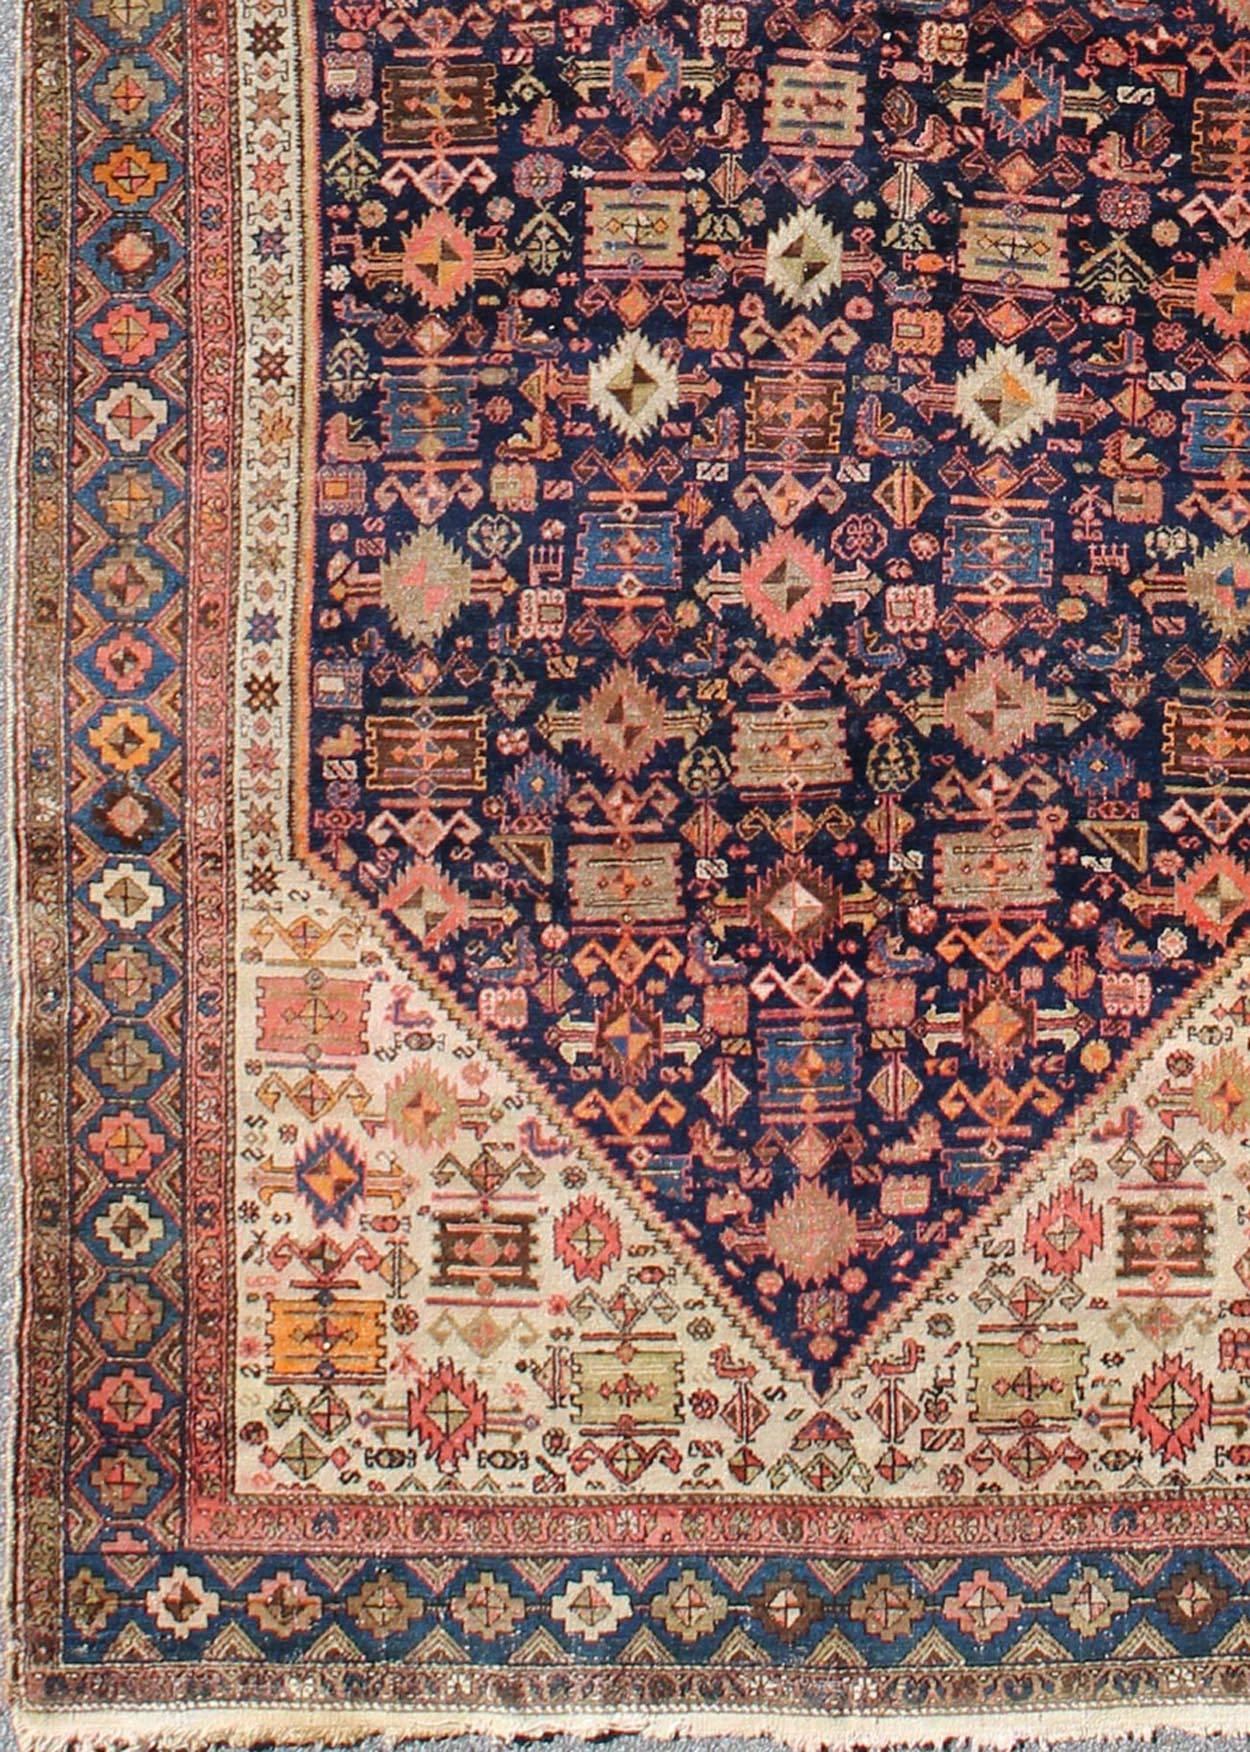 Navy blue antique Persian Malayer antique rug with all-over sub-geometric design, rug tra-170901, country of origin / type: Iran / Malayer, circa 1910

This antique Persian Malayer runner from early 20th century Iran (circa 1910) features an